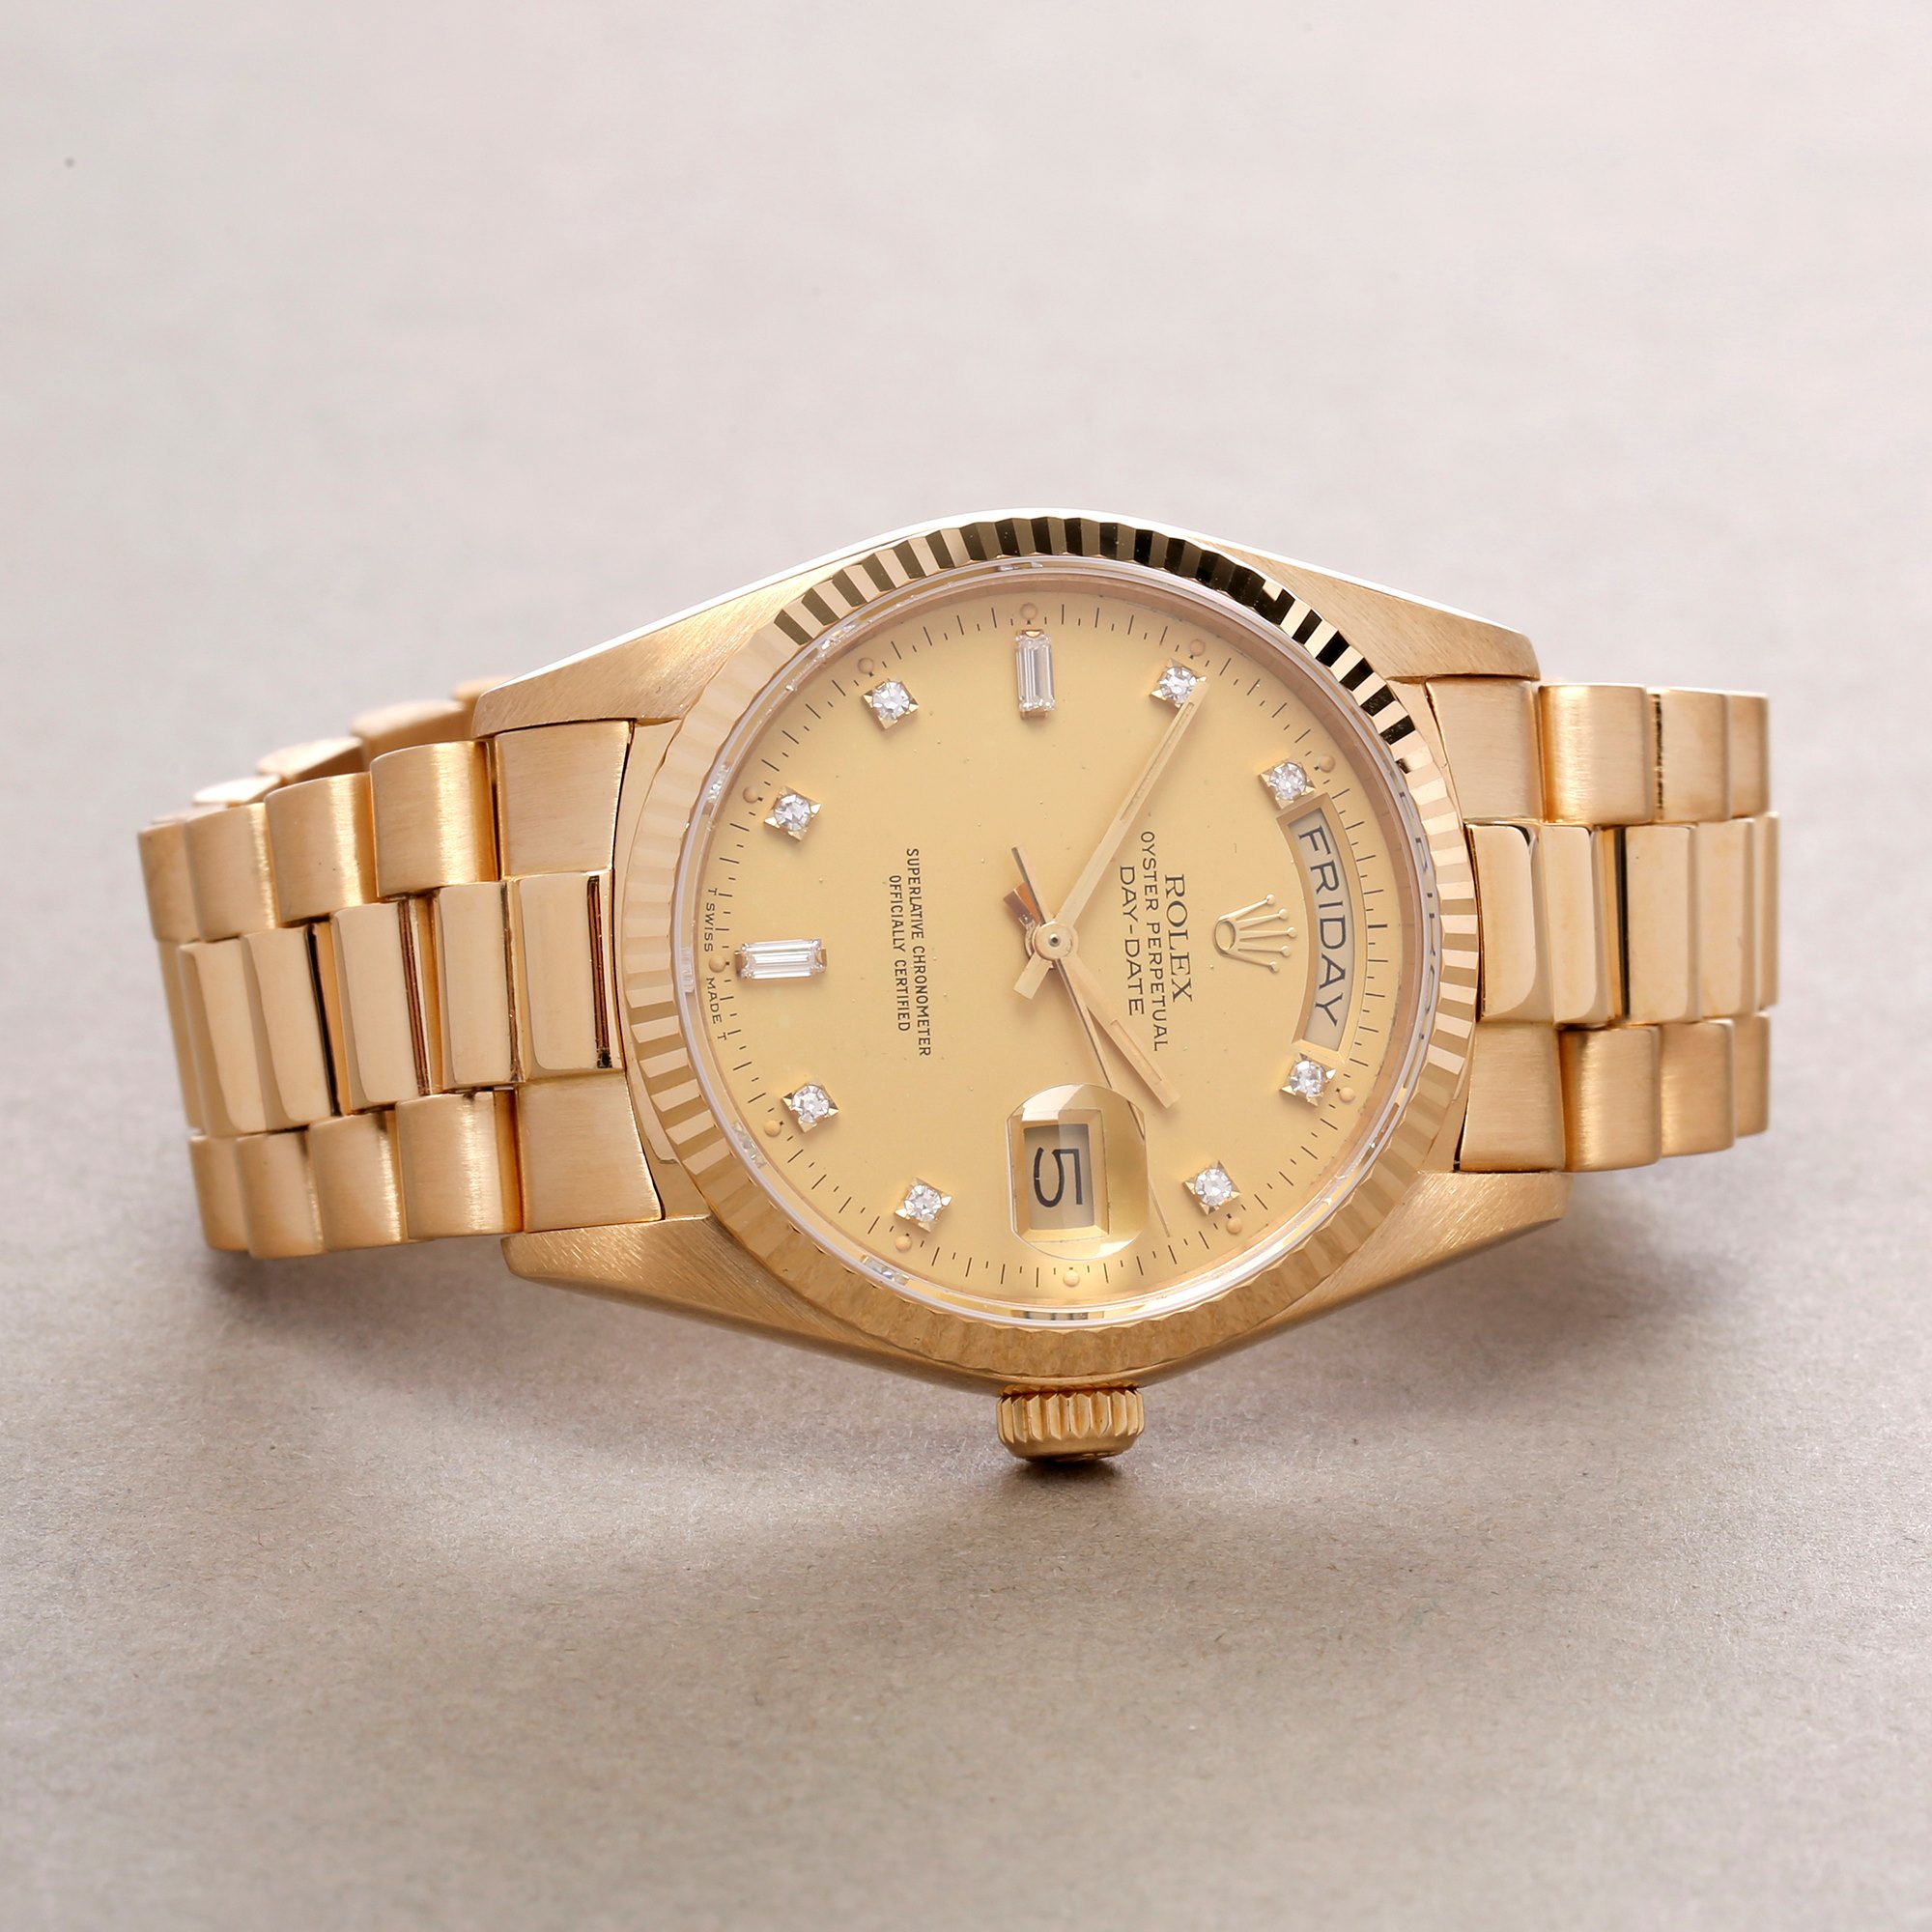 Rolex Day-Date 36 18038A Unisex Yellow Gold Diamond Dial Watch - Image 9 of 10